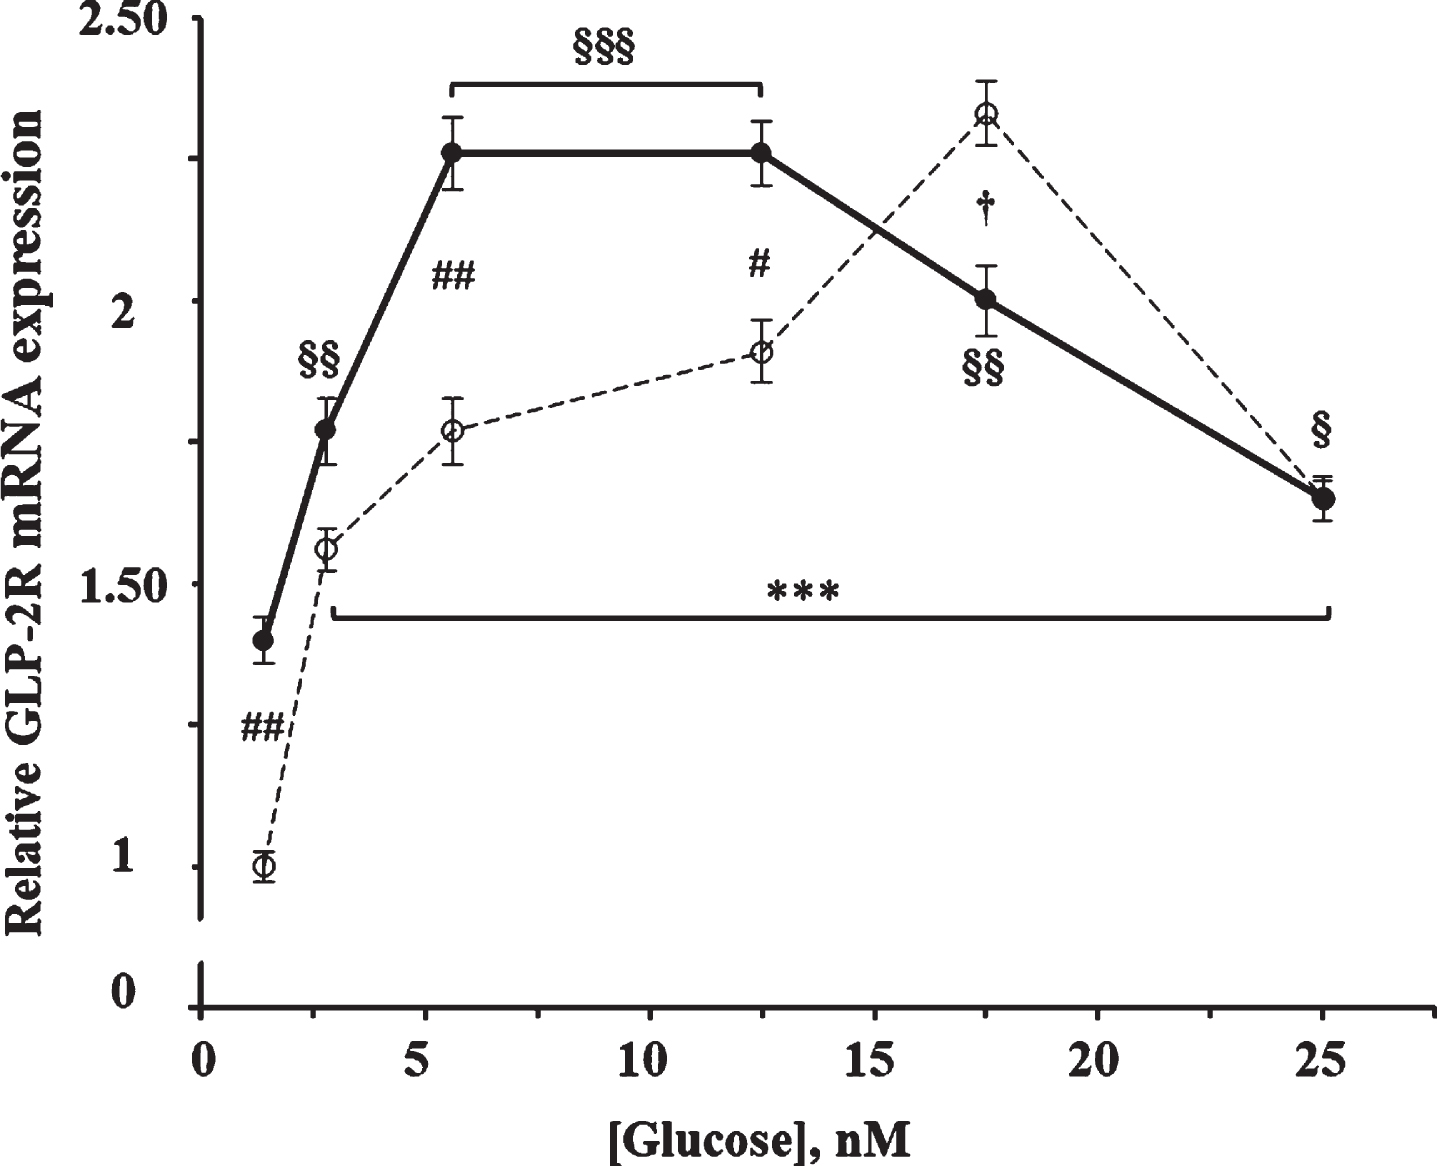 Effect of glucose concentration in the absence and in the presence of GLP-2 on the expression of GLP-2R mRNA in cultured rat astrocytes. Astrocytes were incubated for 4 h in serum-free DMEM medium, supplemented with 2 mg/mL BSA, containing the specified concentrations of glucose in the absence (∘) and the presence of 10 nM GLP-2 (•). GLP-2R mRNA was analyzed using real-time quantitative RT-PCR as indicated in the experimental procedures. Results are presented as the mean±SEM (n = 12 for the lowest glucose concentration; n = 6 for the others). ***p < 0.001, significant effect of glucose content on gene expression compared to 1.4 mM in the absence of GLP-2, and §p < 0.05; §§p < 0.01; §§§p < 0.001, significant effect of glucose content on gene expression compared to 1.4 mM in the presence of GLP-2, using 1-way ANOVA with Dunnet correction. #p < 0.05 (†p < 0.06), significant effect when comparing GLP-2 treated cells with untreated ones, using 2-way ANOVA with Bonferroni and Tukey corrections.